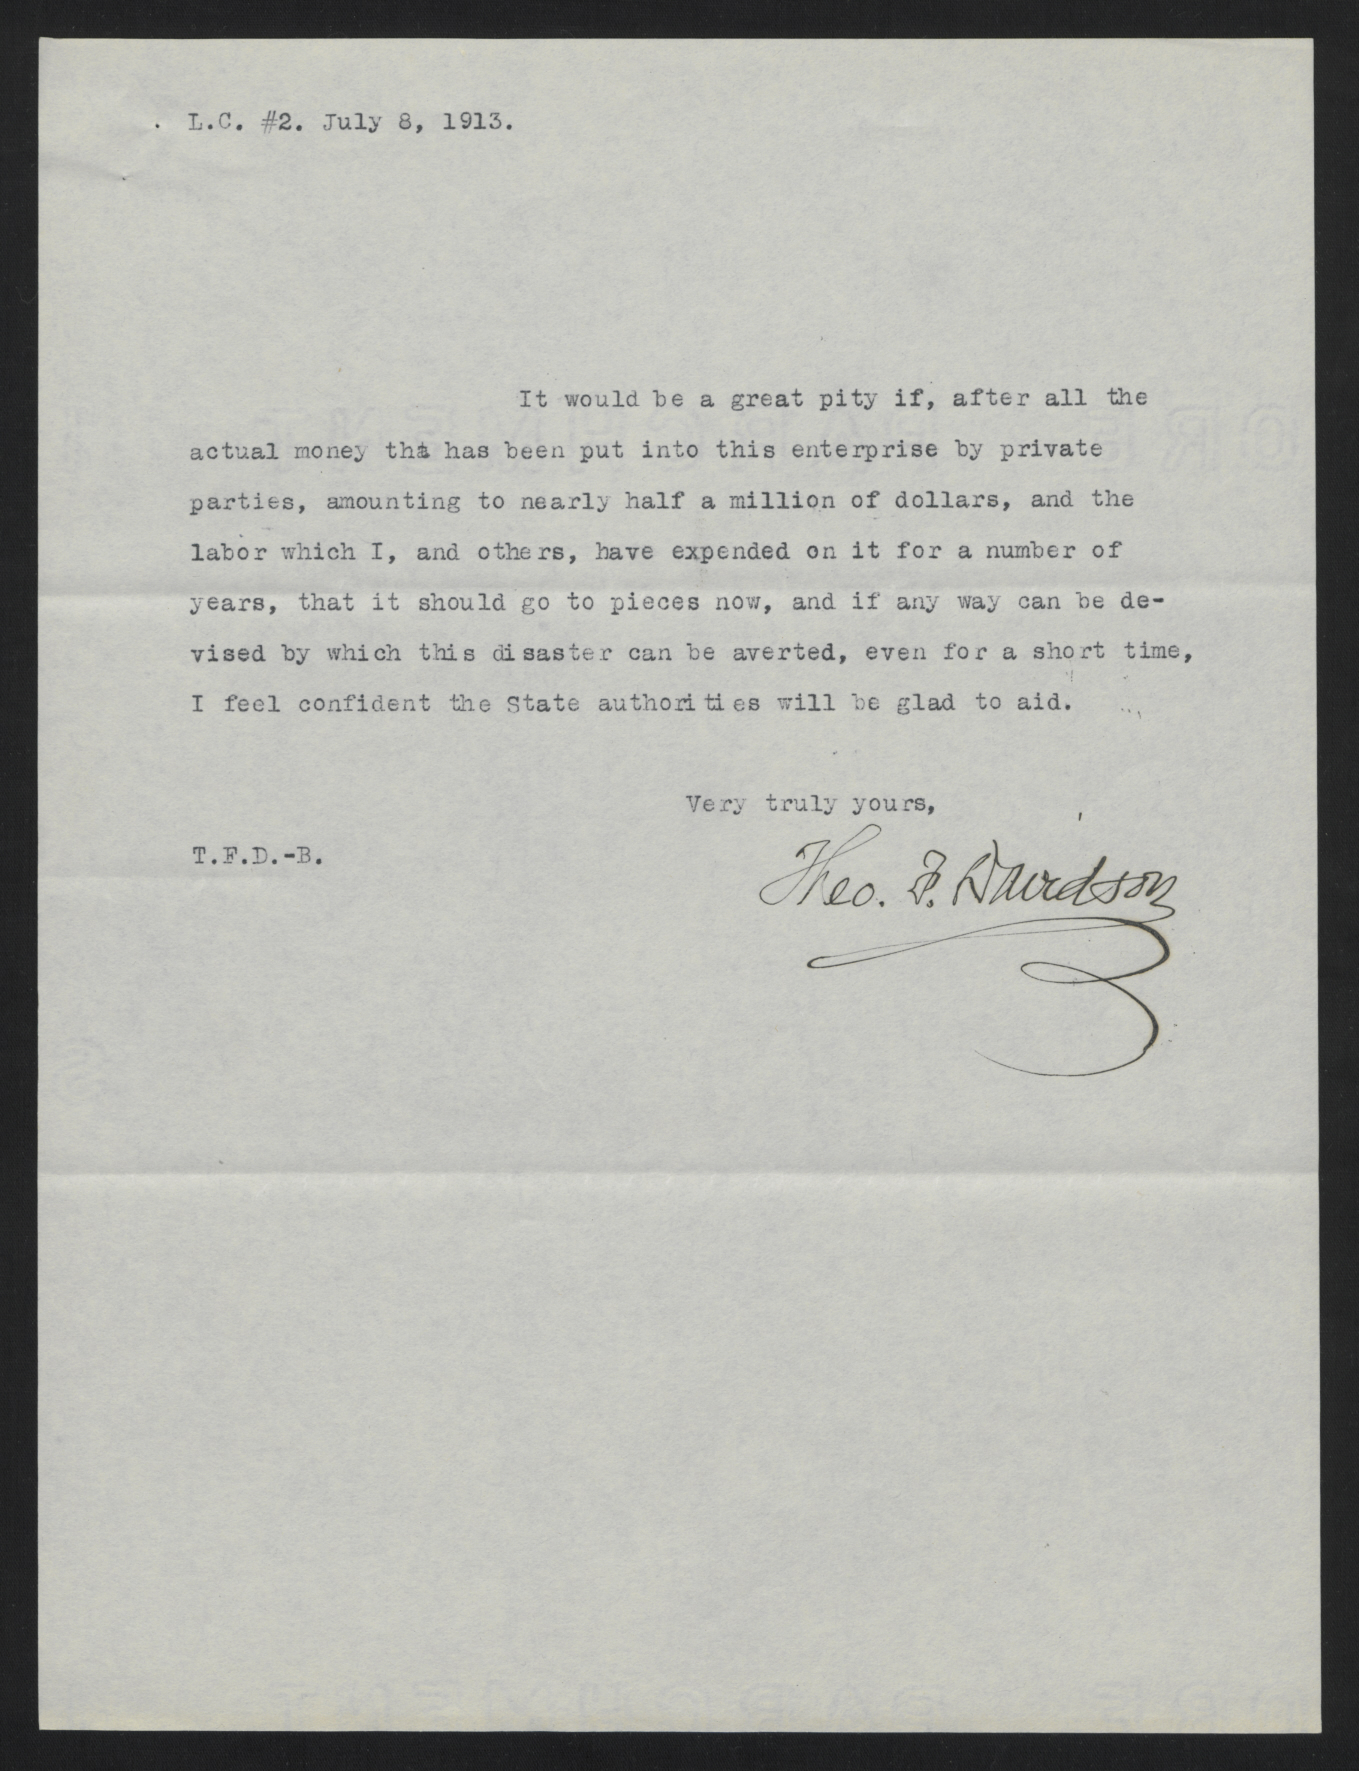 Letter from Davidson to Craig, July 8, 1913, page 2